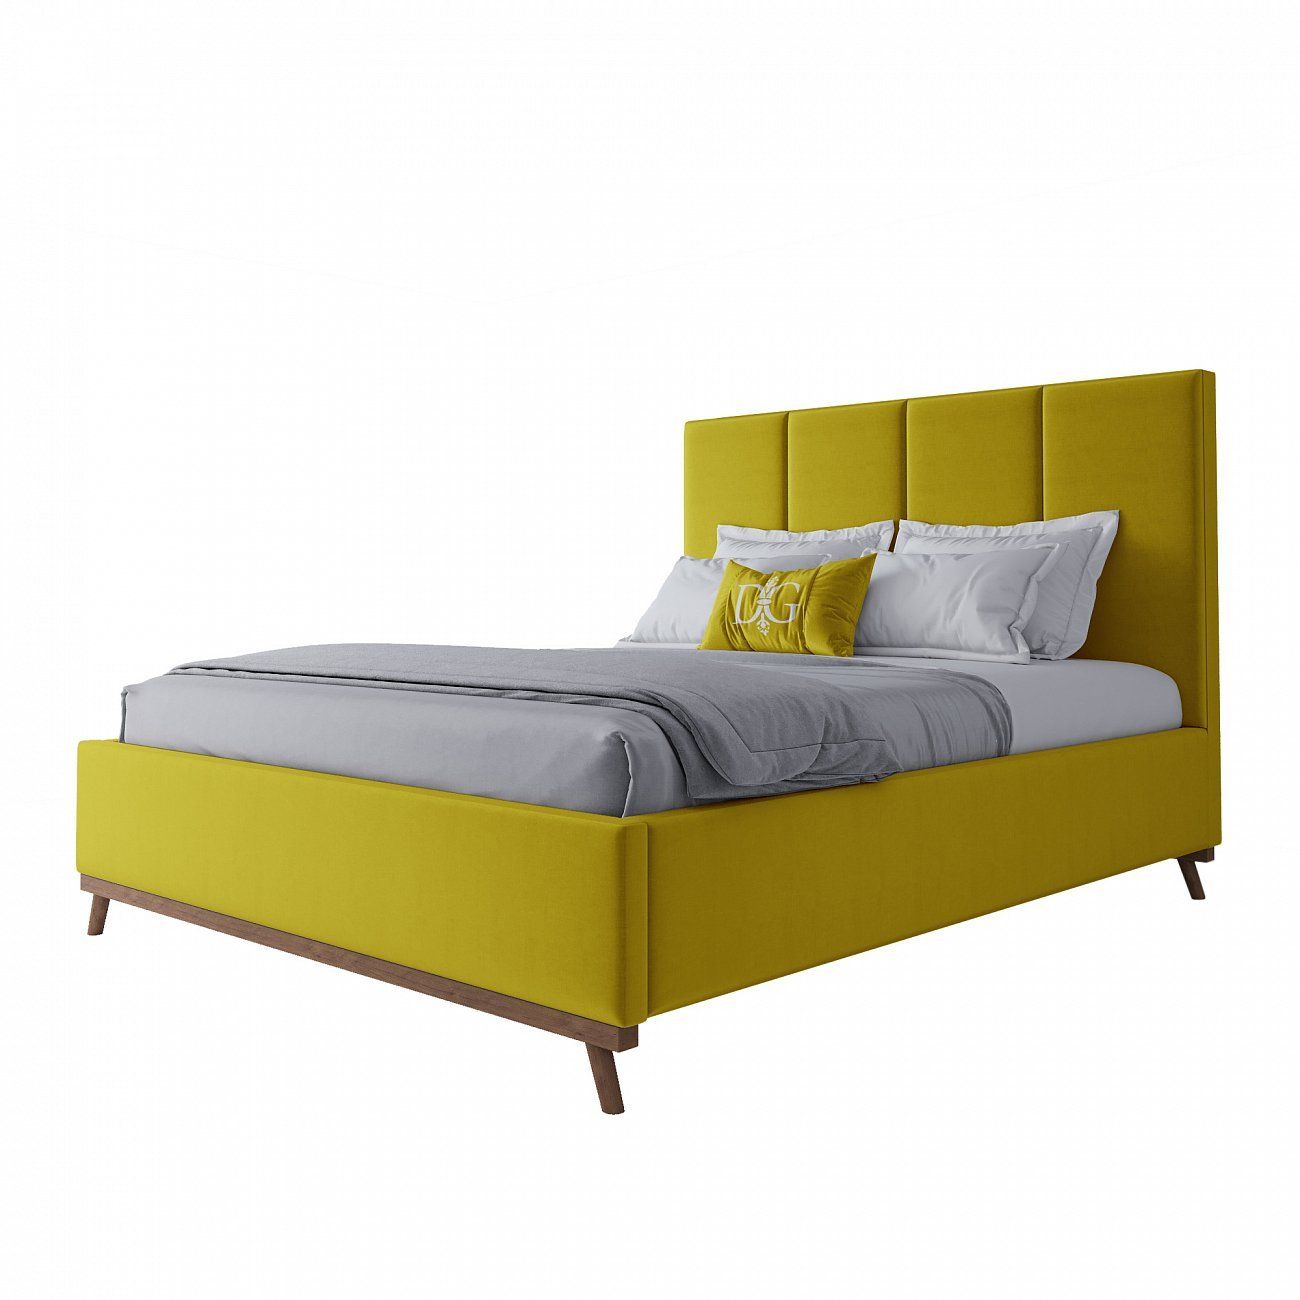 Double bed 180x200 yellow Carter Gold